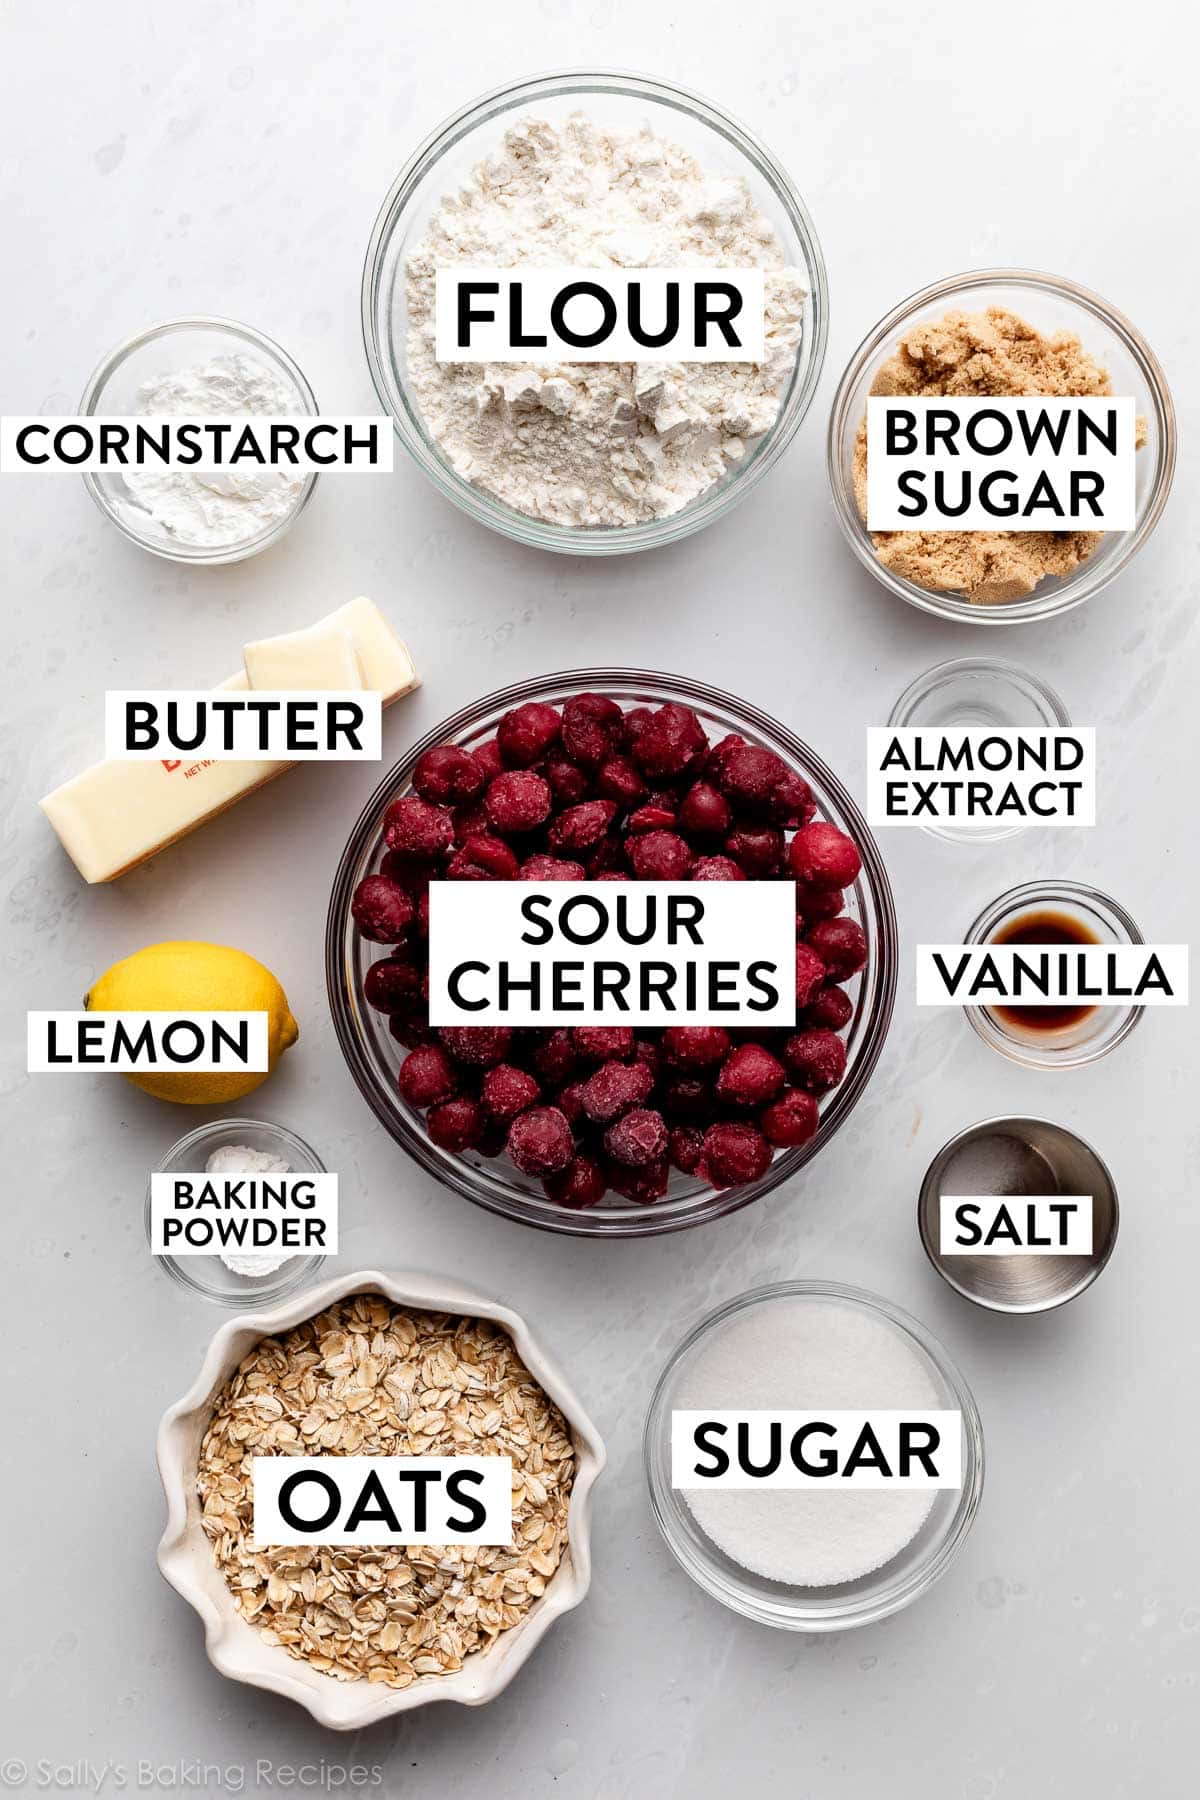 measured ingredients on counter including sour cherries, flour, brown sugar, butter, oats, sugar, and salt.